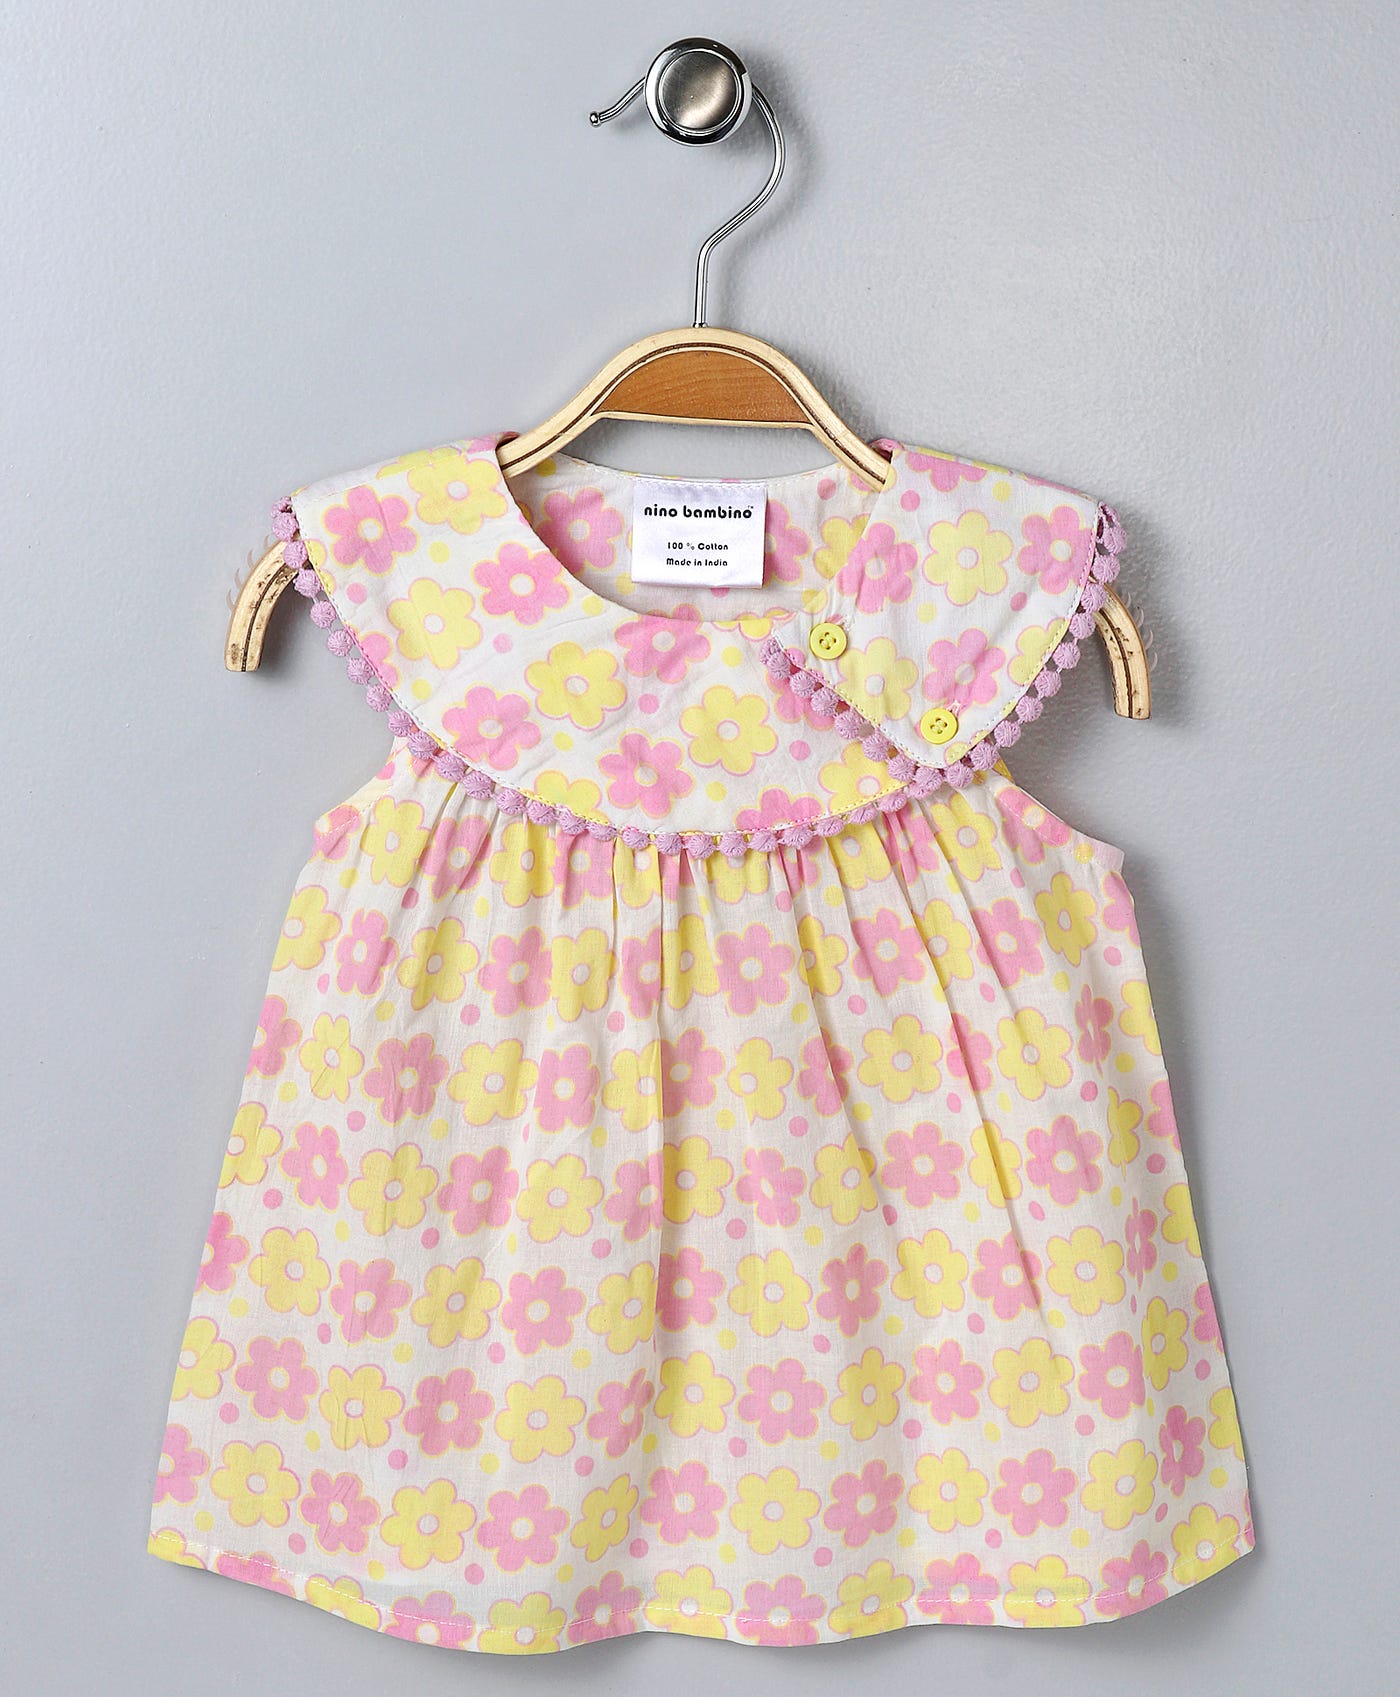 Advancement of Baby Girl Clothing — Stitching And Designing Adding Great  Appeal, by Nino Bambino